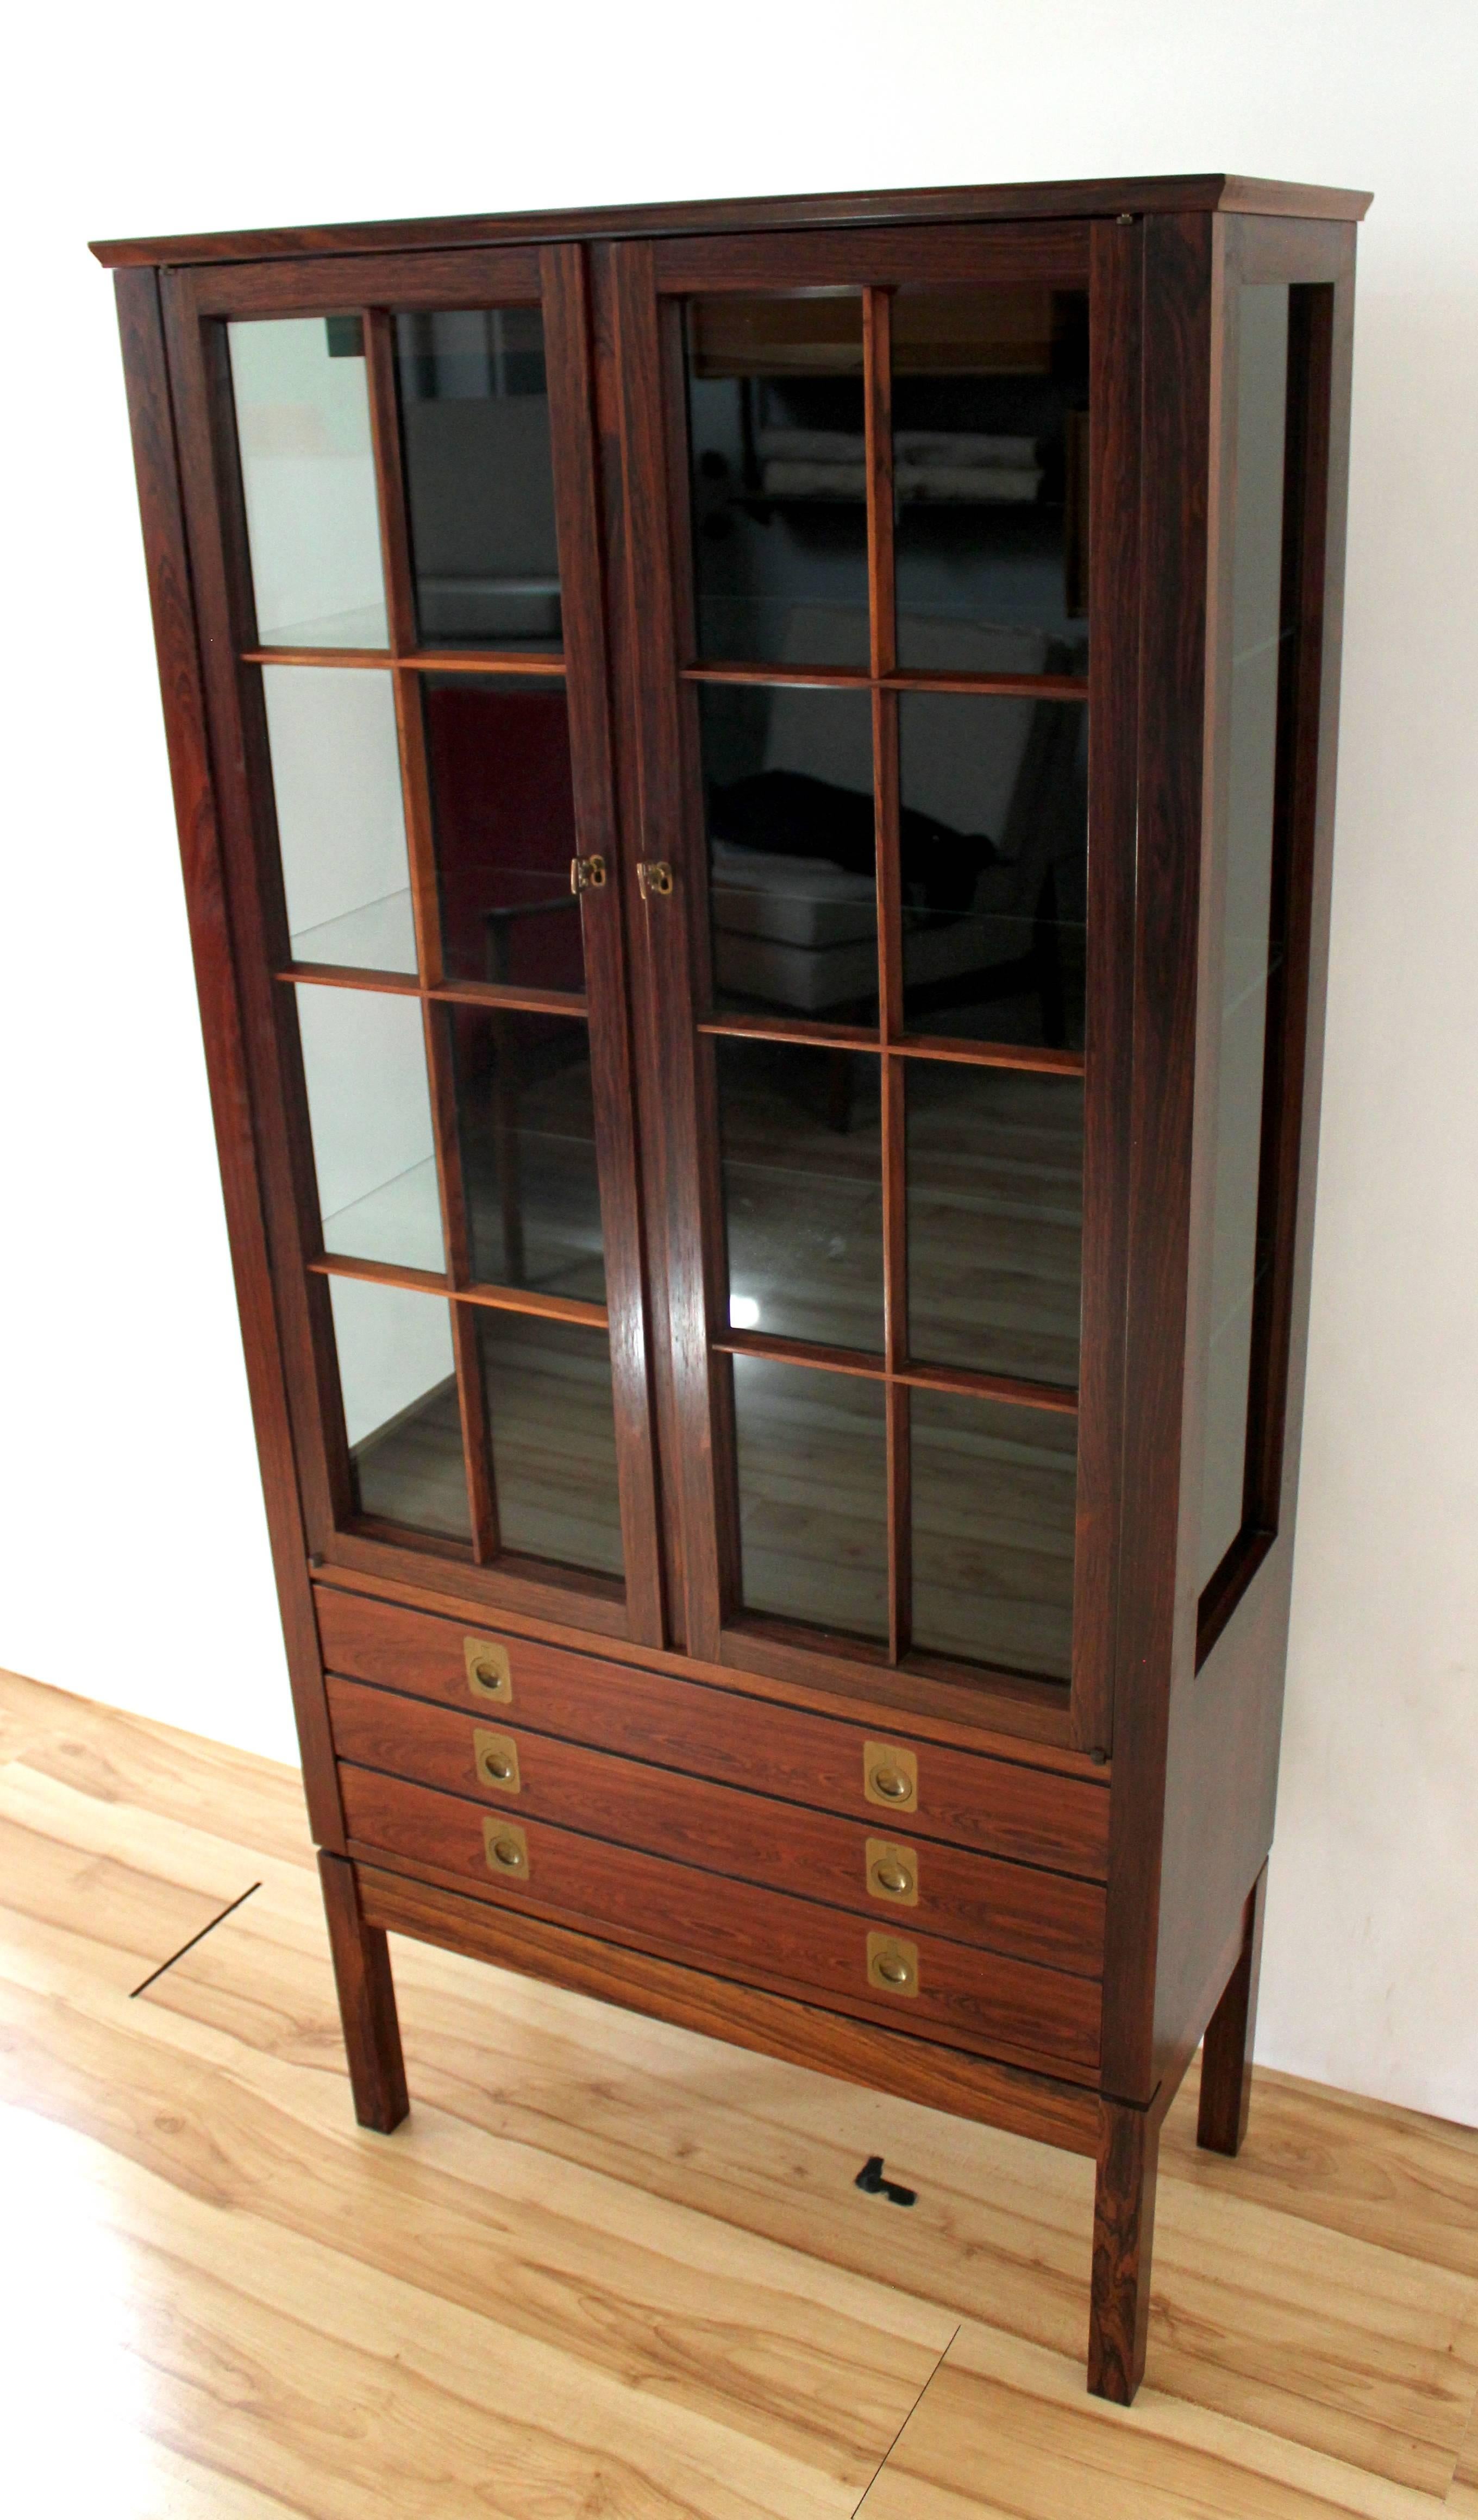 1960s rosewood lighted curio cabinet designed by Torbjørn Afdal for Bruksbo, made in Norway. Cabinet has two locking glass-fronted doors with keys, glass side panels, interior glass shelves, and three drawers with brass pulls.